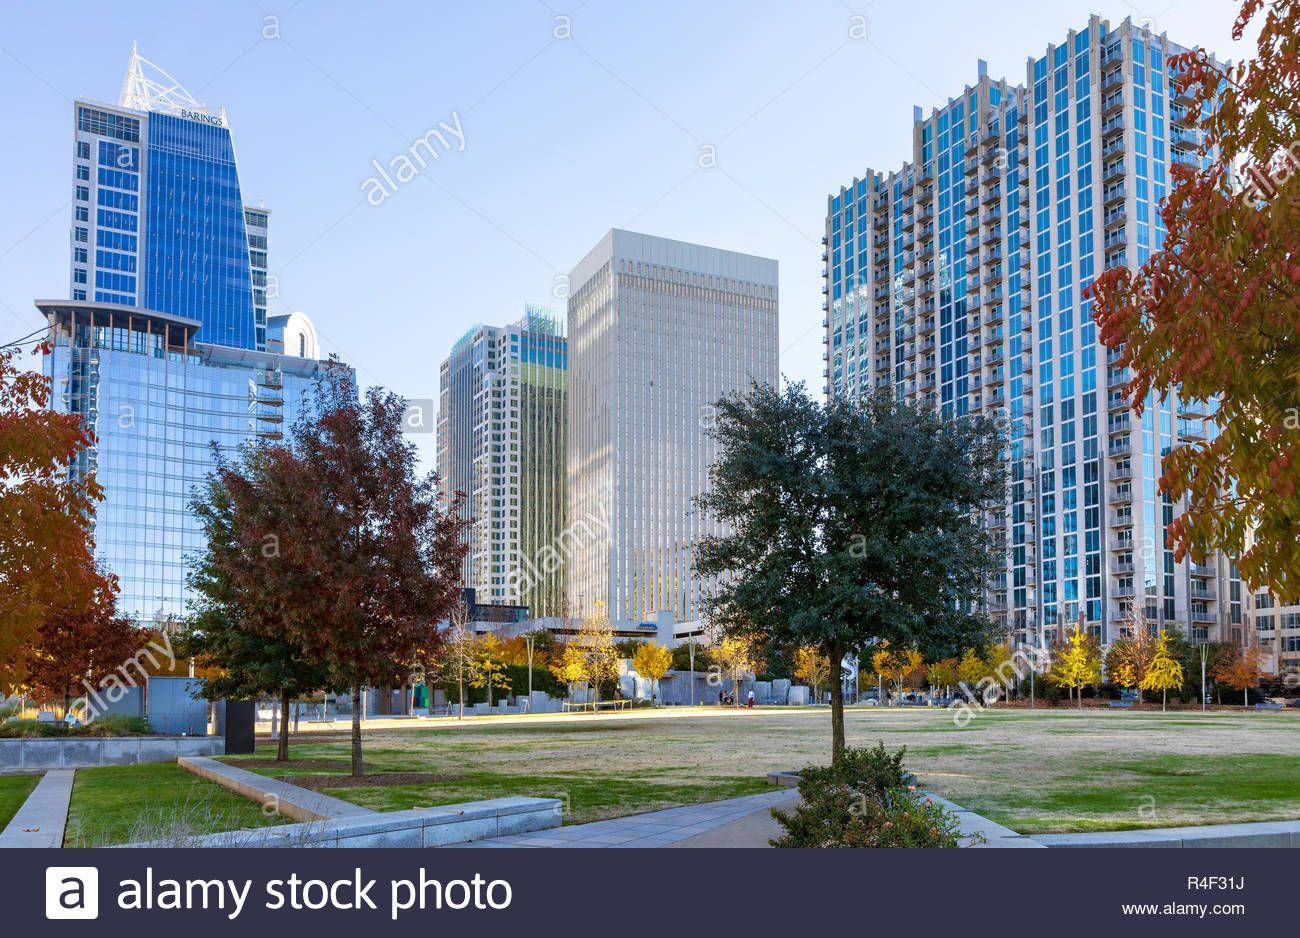 Charlotte Nc Usa Romare Bearden Park With Skyscrapers